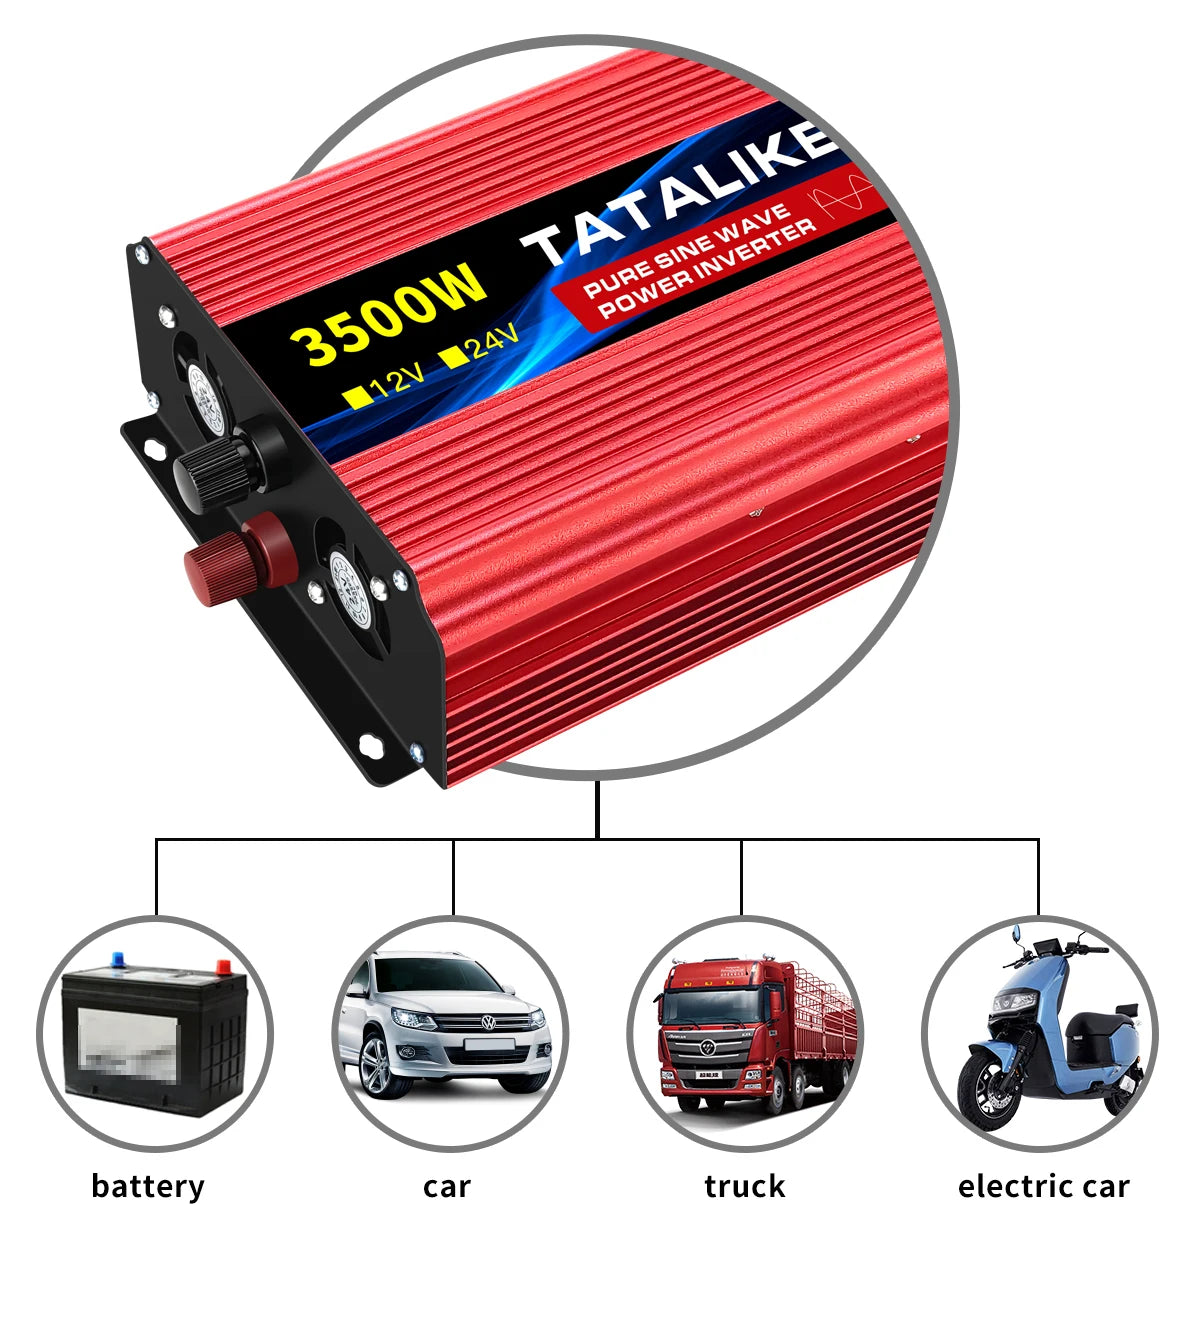 Car-to-home inverter converts DC car power to AC house power with sine wave tech and LED display.